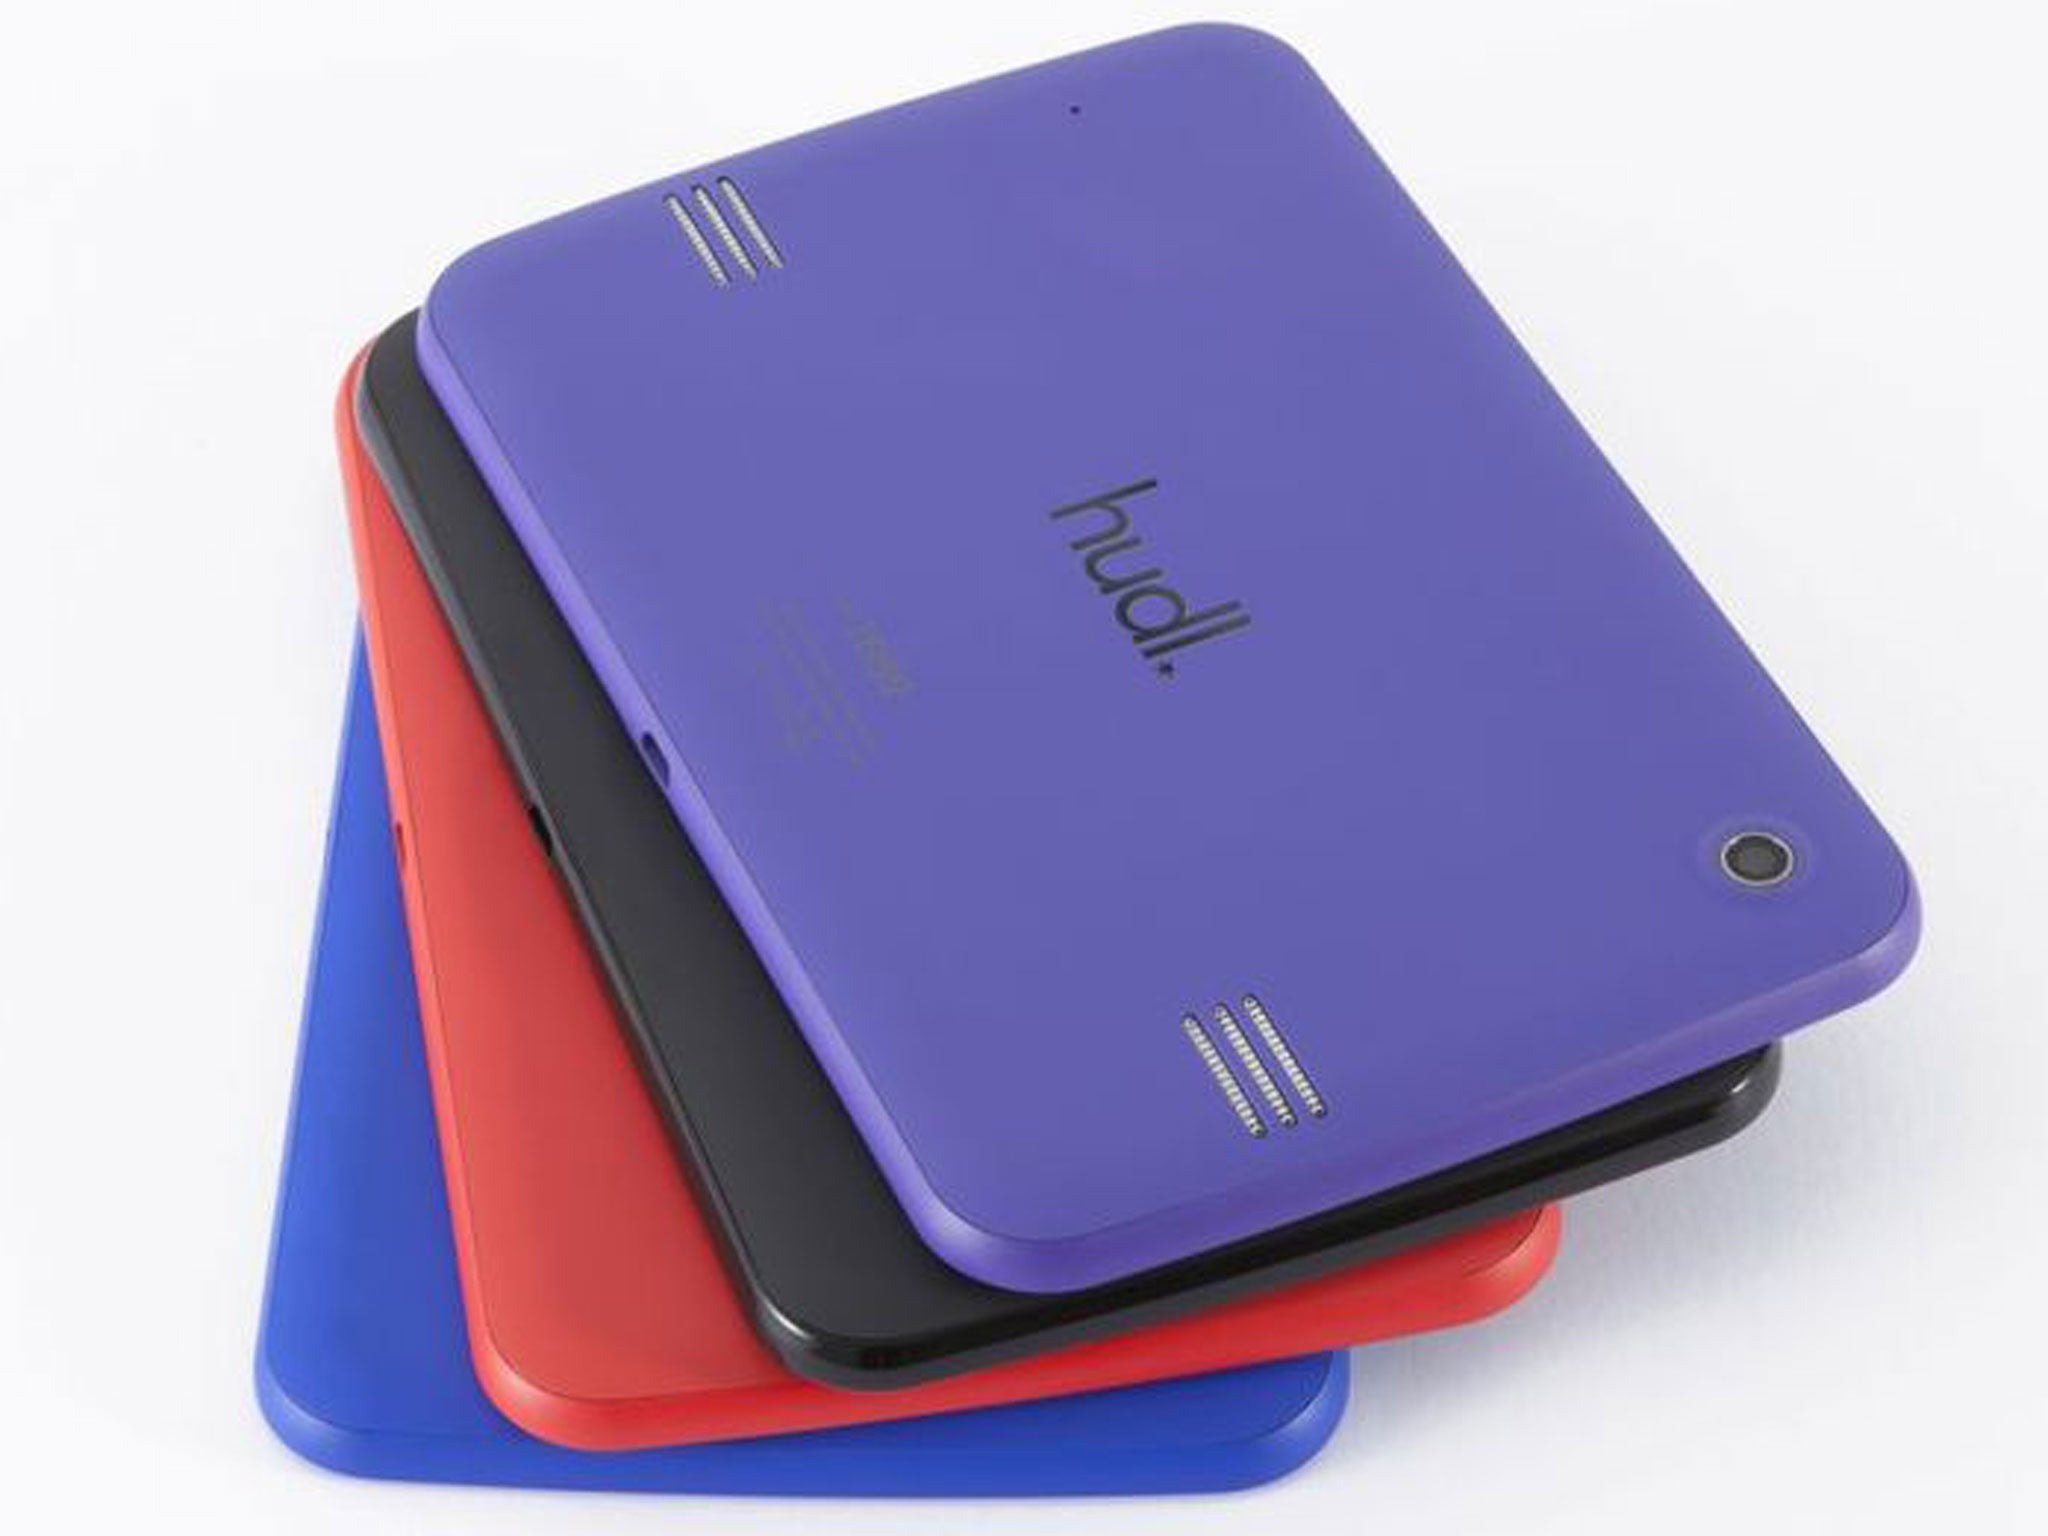 The Tesco Hudl comes in a range of colours - blue, red, black or purple.